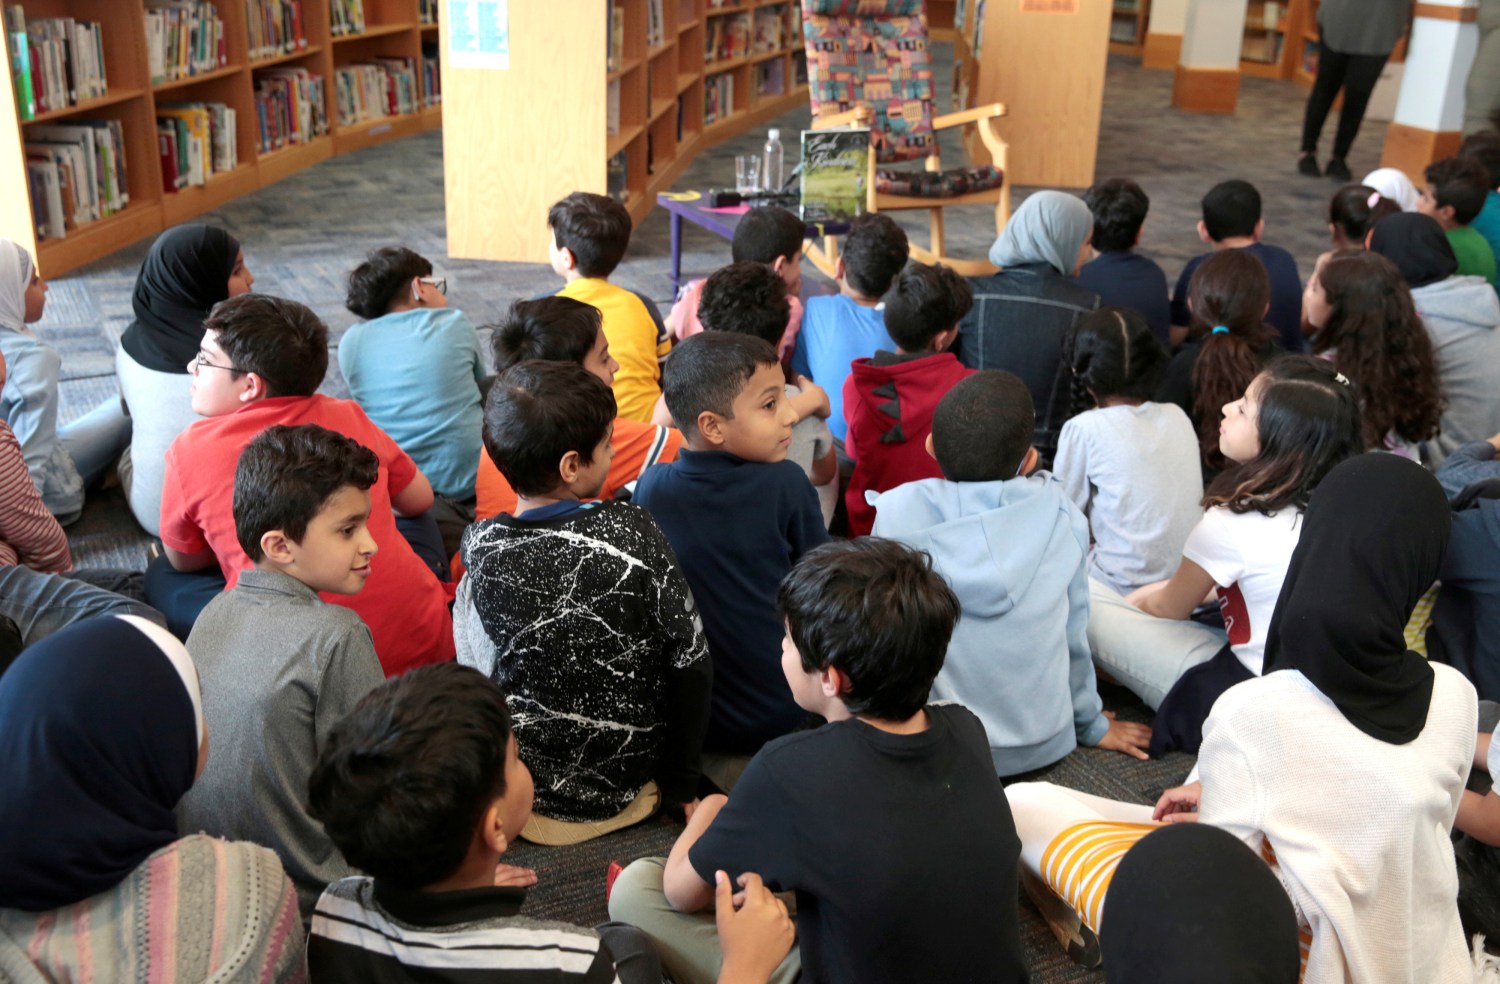 Students at Miller Elementary School sit and wait in the library for a visit from Senator Kamala Harris in Dearborn, Michigan, U.S. May 6, 2019.  REUTERS/Rebecca Cook